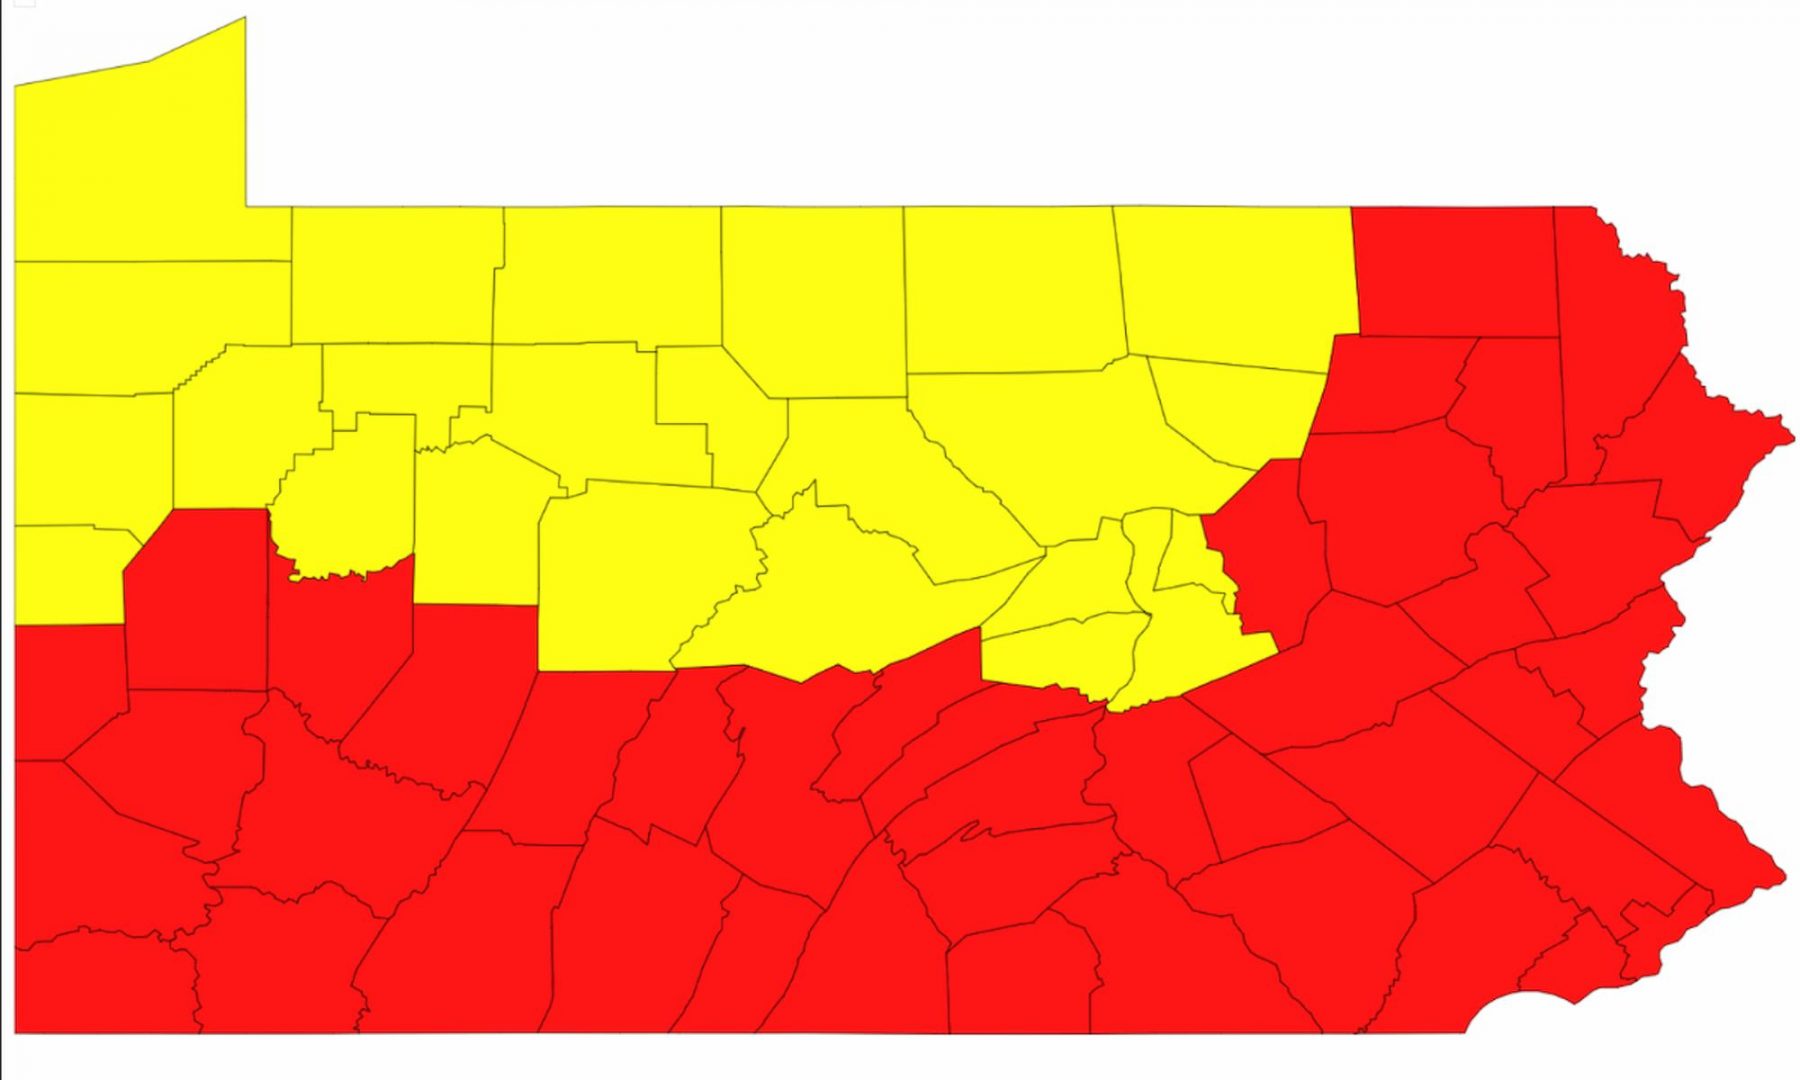 The counties in yellow will be the first to begin reopening, beginning Friday, May 8.